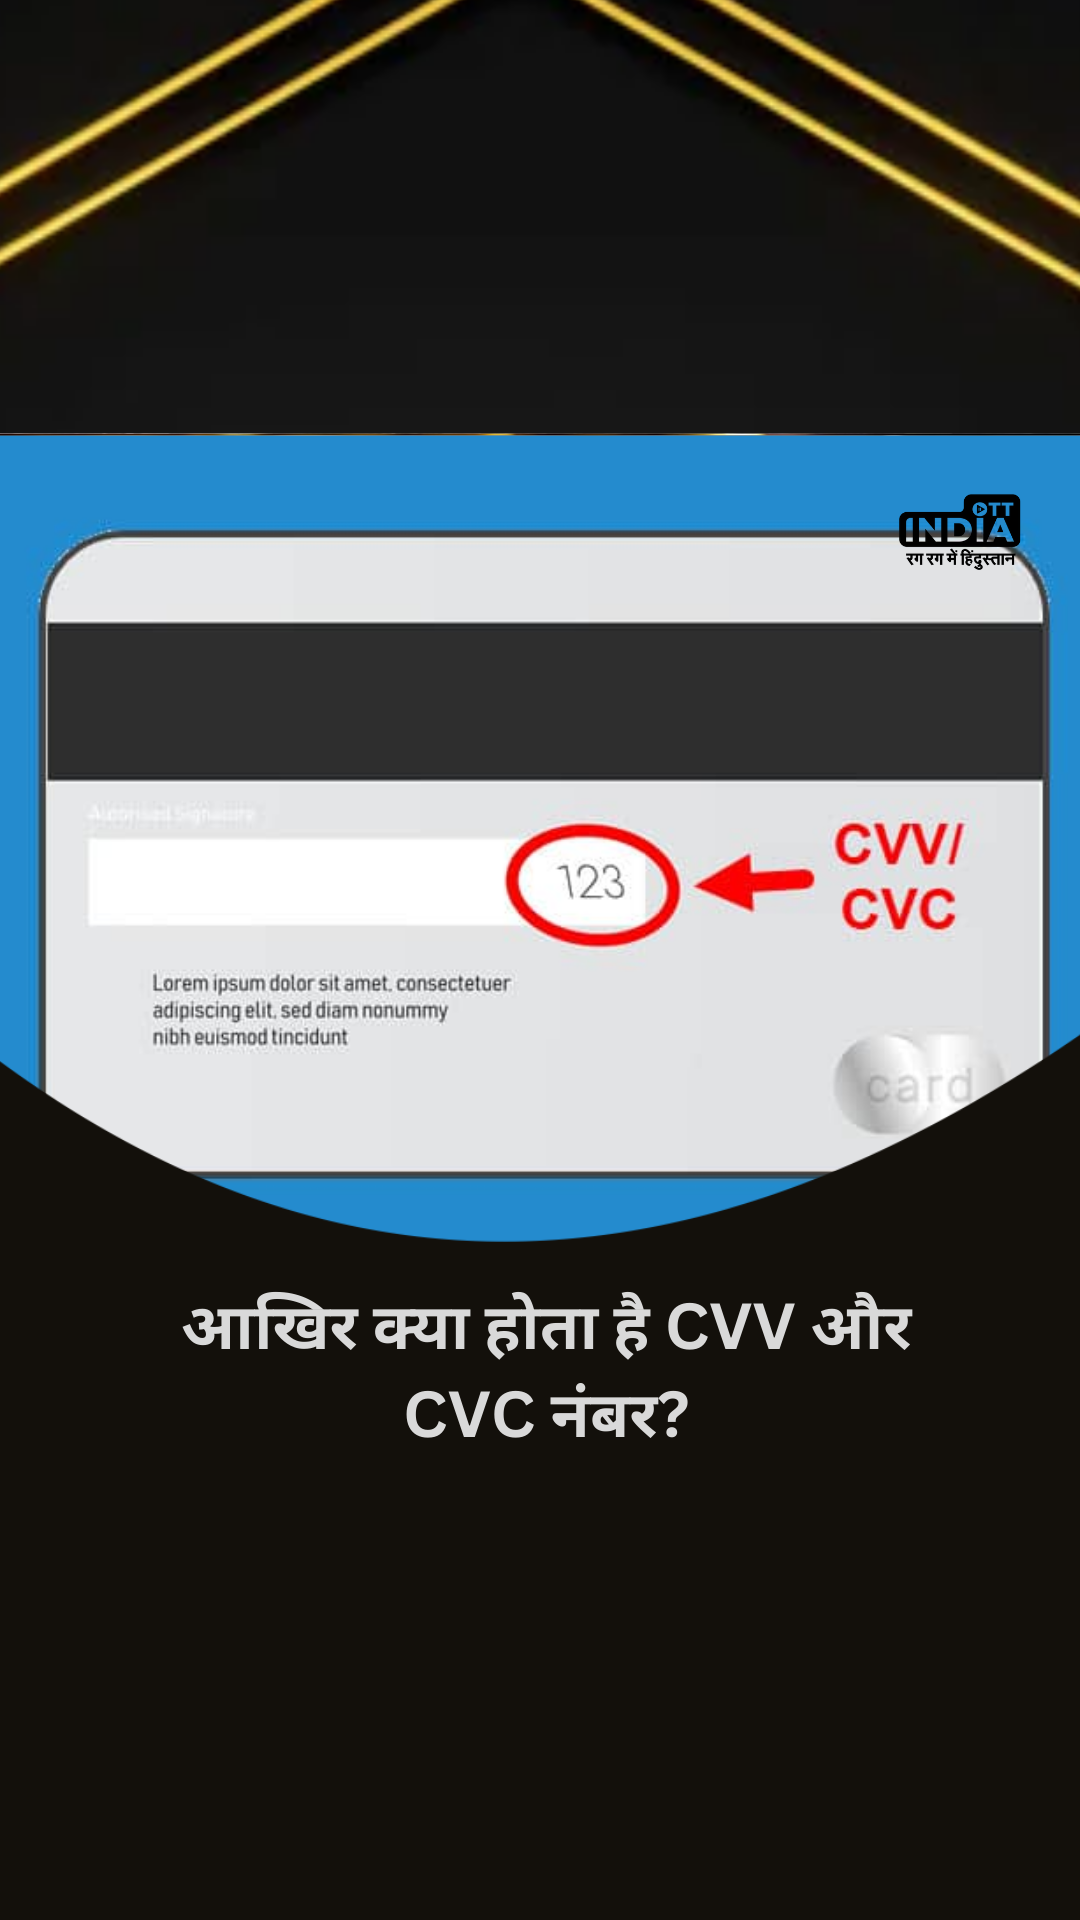 After all, what are CVV and CVC numbers? And why does the bank ask to keep it hidden?